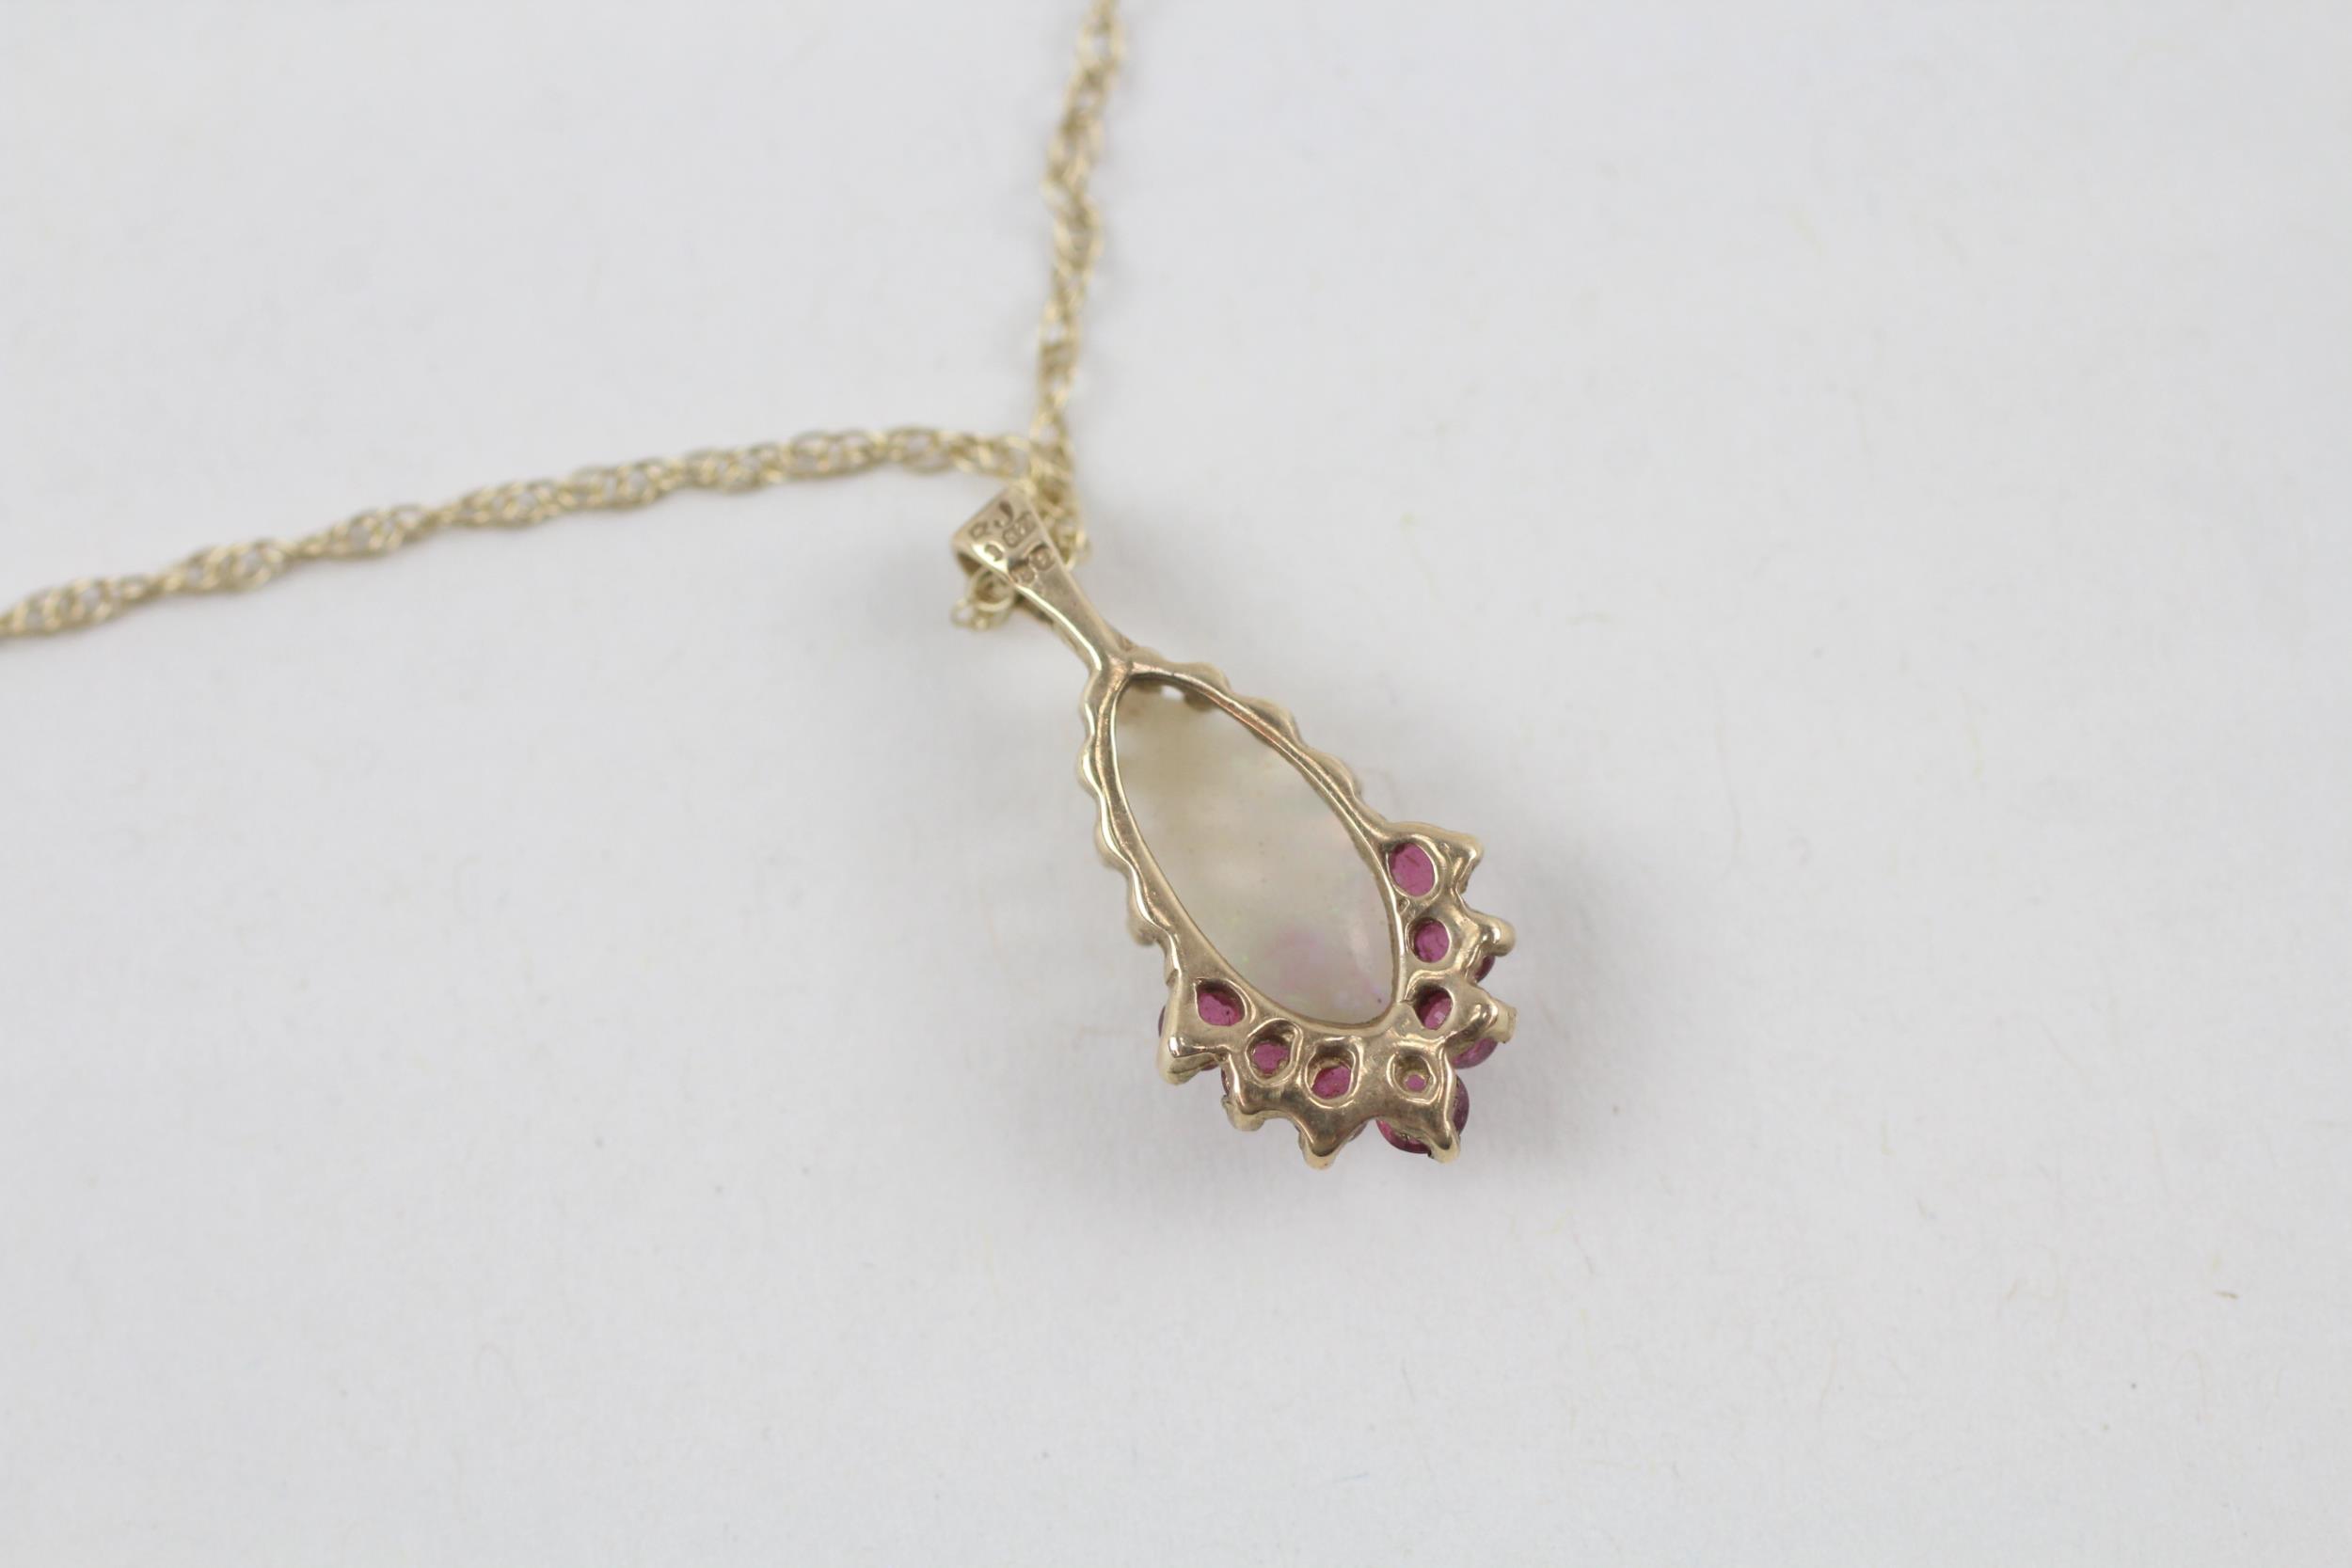 9ct gold vintage opal & ruby pendant necklace (1.7g) - Image 5 of 6